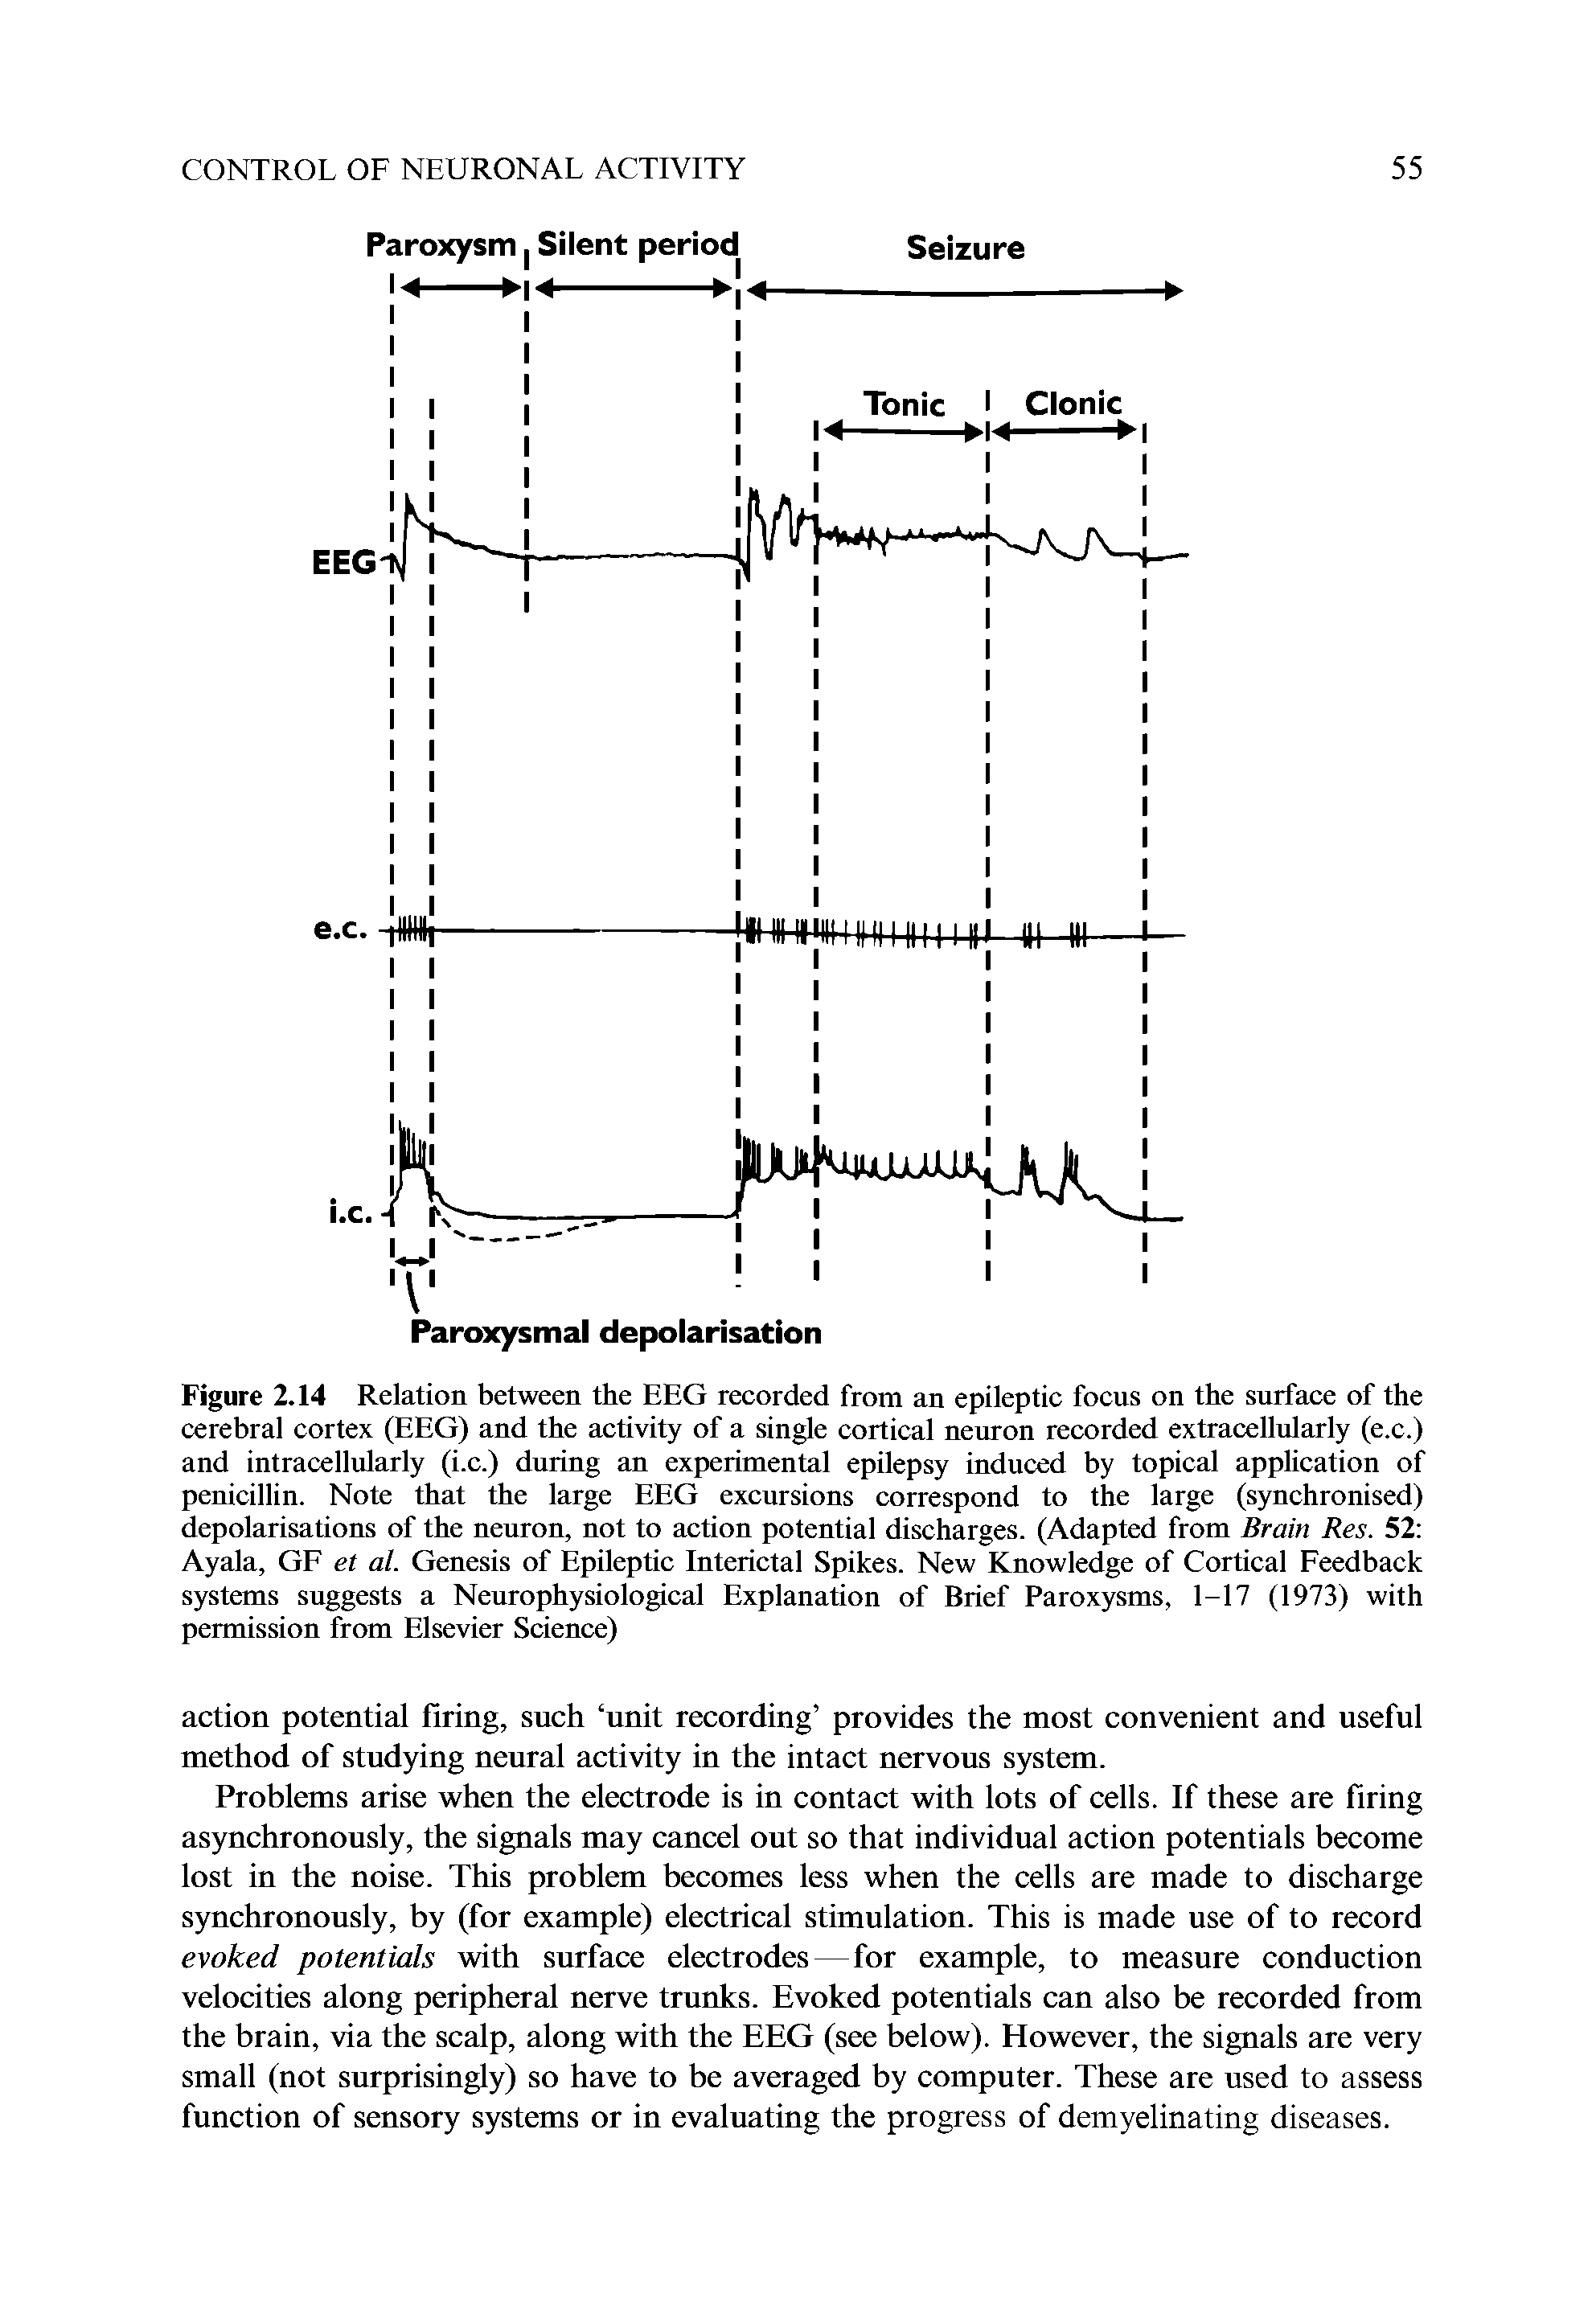 Figure 2.14 Relation between the EEG recorded from an epileptic focus on the surface of the cerebral cortex (EEG) and the activity of a single cortical neuron recorded extracellularly (e.c.) and intracellularly (i.c.) during an experimental epilepsy induced by topical application of penicillin. Note that the large EEG excursions correspond to the large (synchronised) depolarisations of the neuron, not to action potential discharges. (Adapted from Brain Res. 52 Ayala, GF et al. Genesis of Epileptic Interictal Spikes. New Knowledge of Cortical Feedback systems suggests a Neurophysiological Explanation of Brief Paroxysms, 1-17 (1973) with permission from Elsevier Science)...